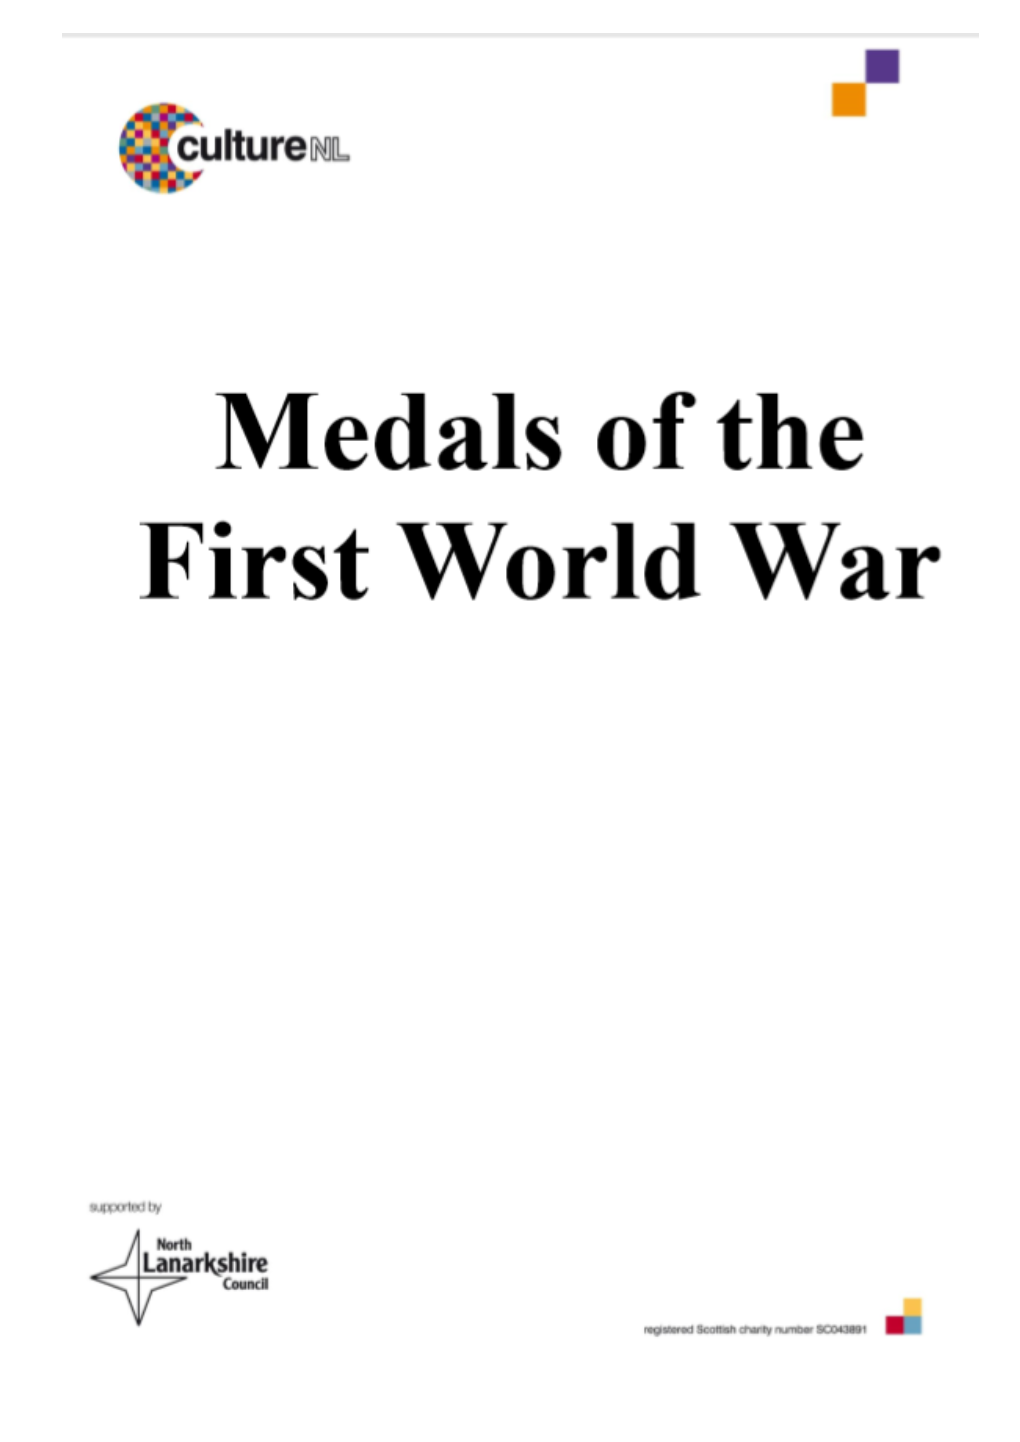 Medals of the First World